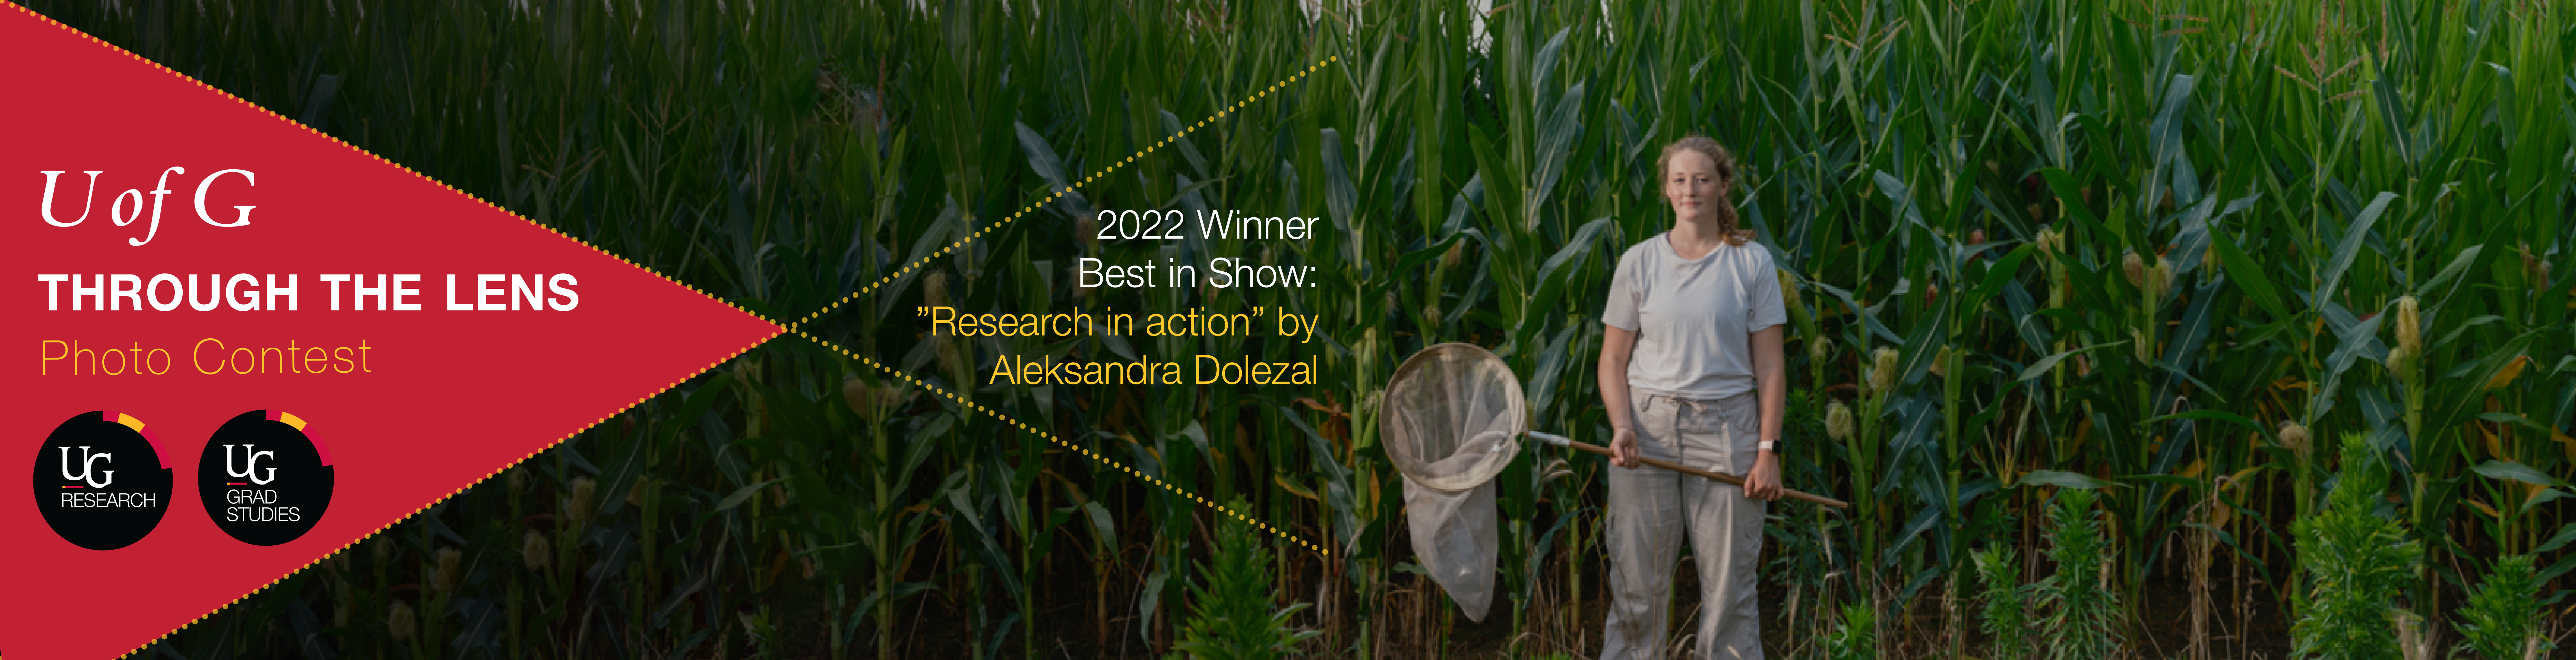 Photo Contest Logo over a photo of a young researcher in front of a wall of corn